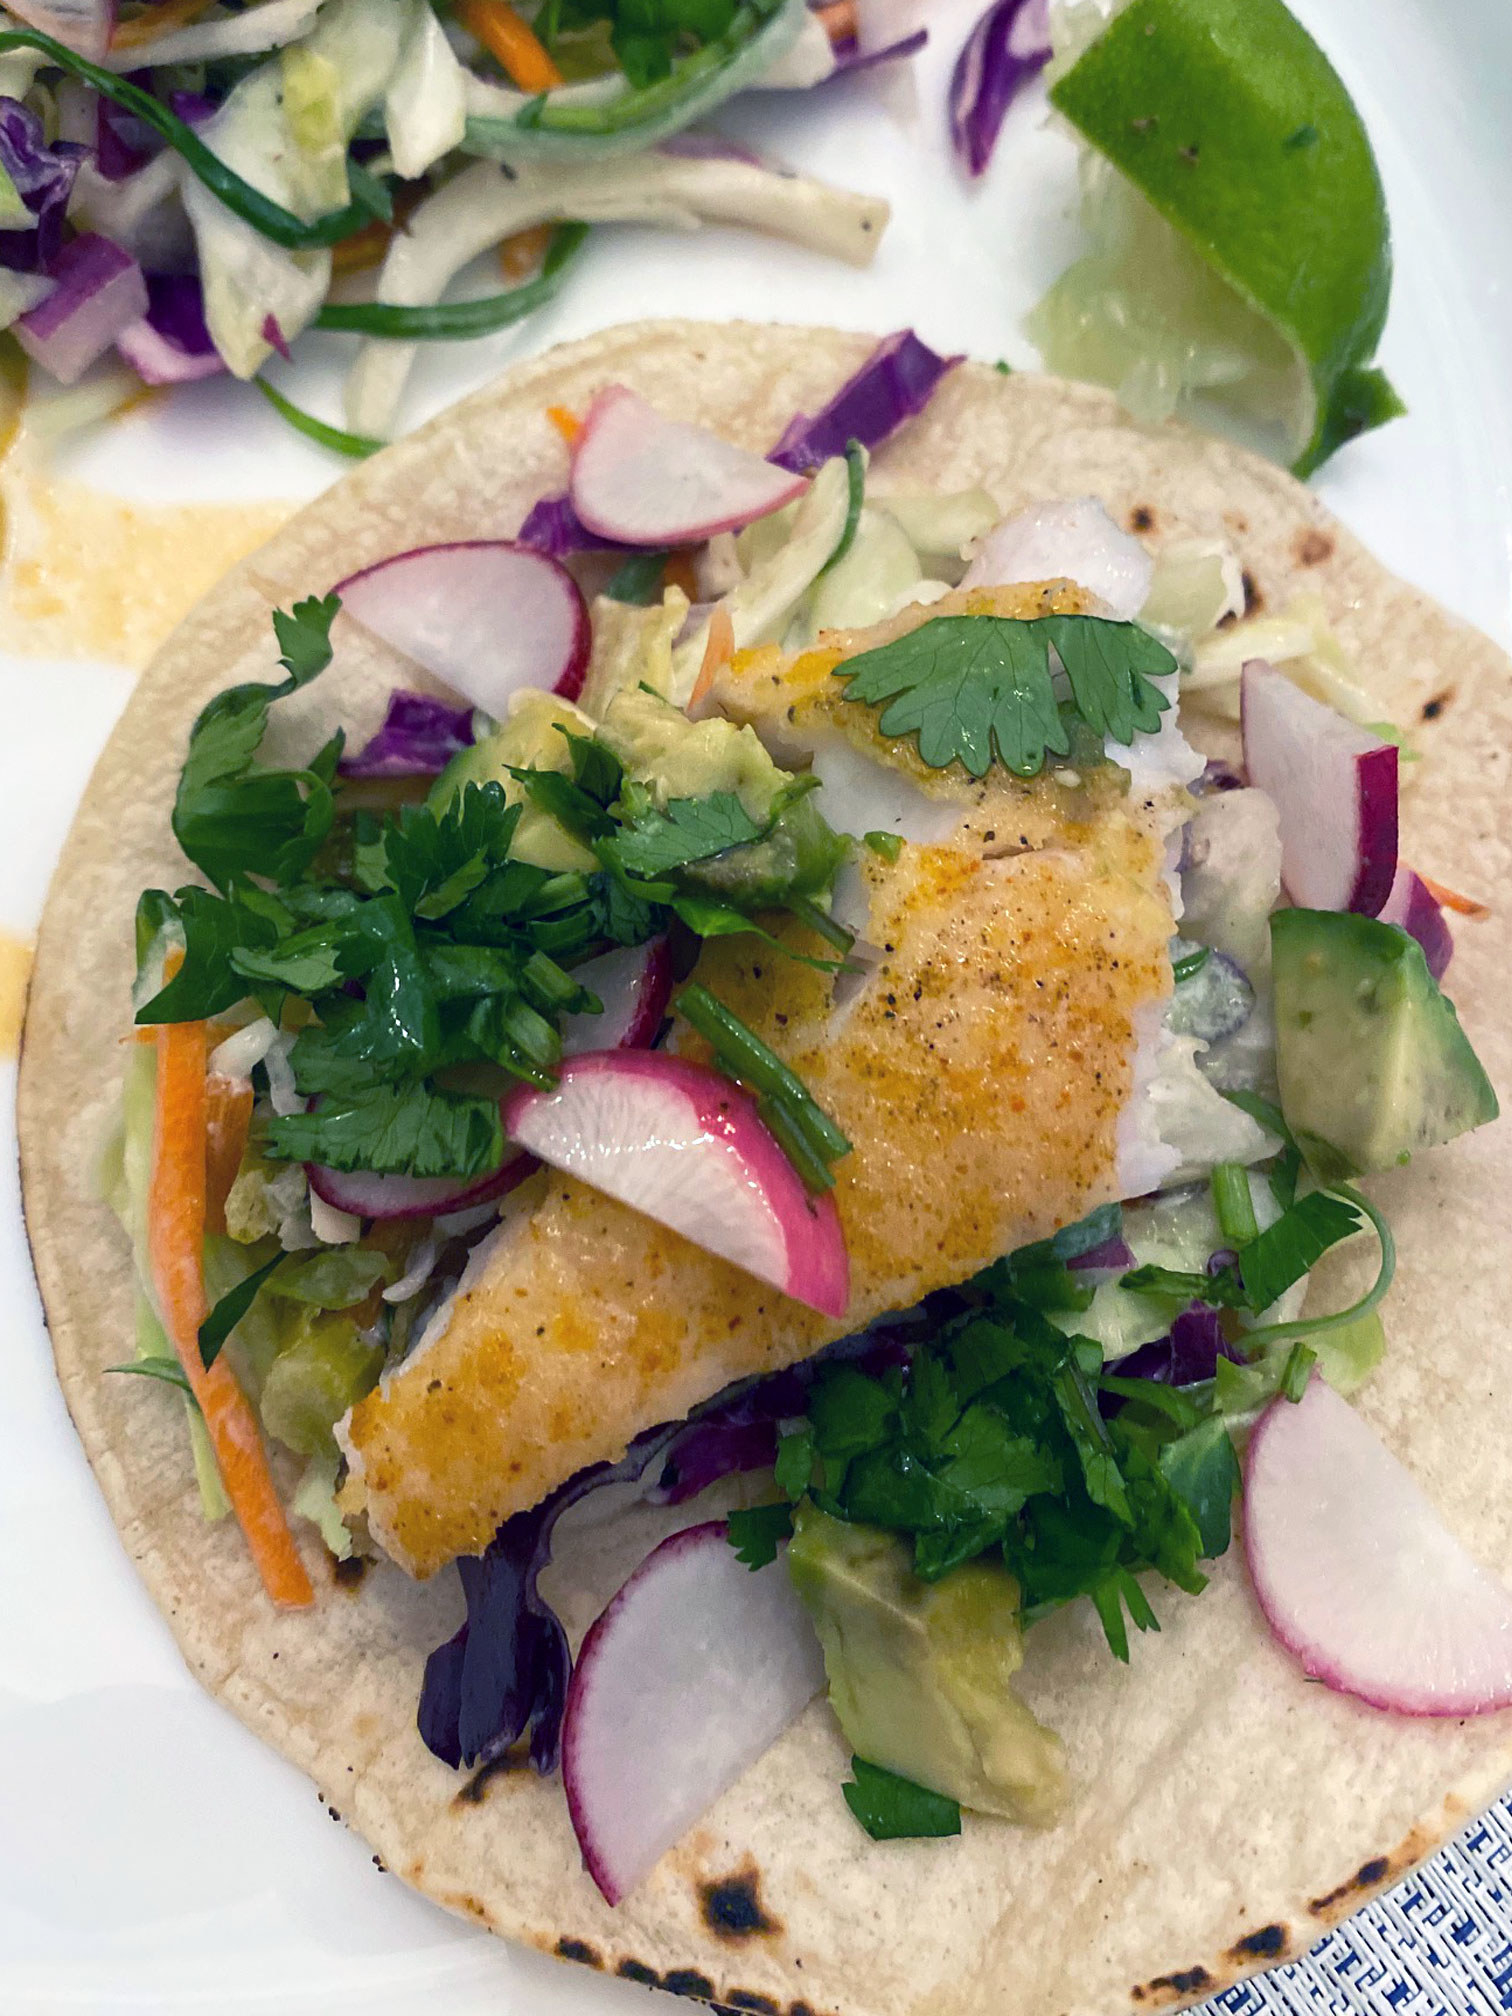 Air-fried, blackened fish tacos with slaw and avocado.